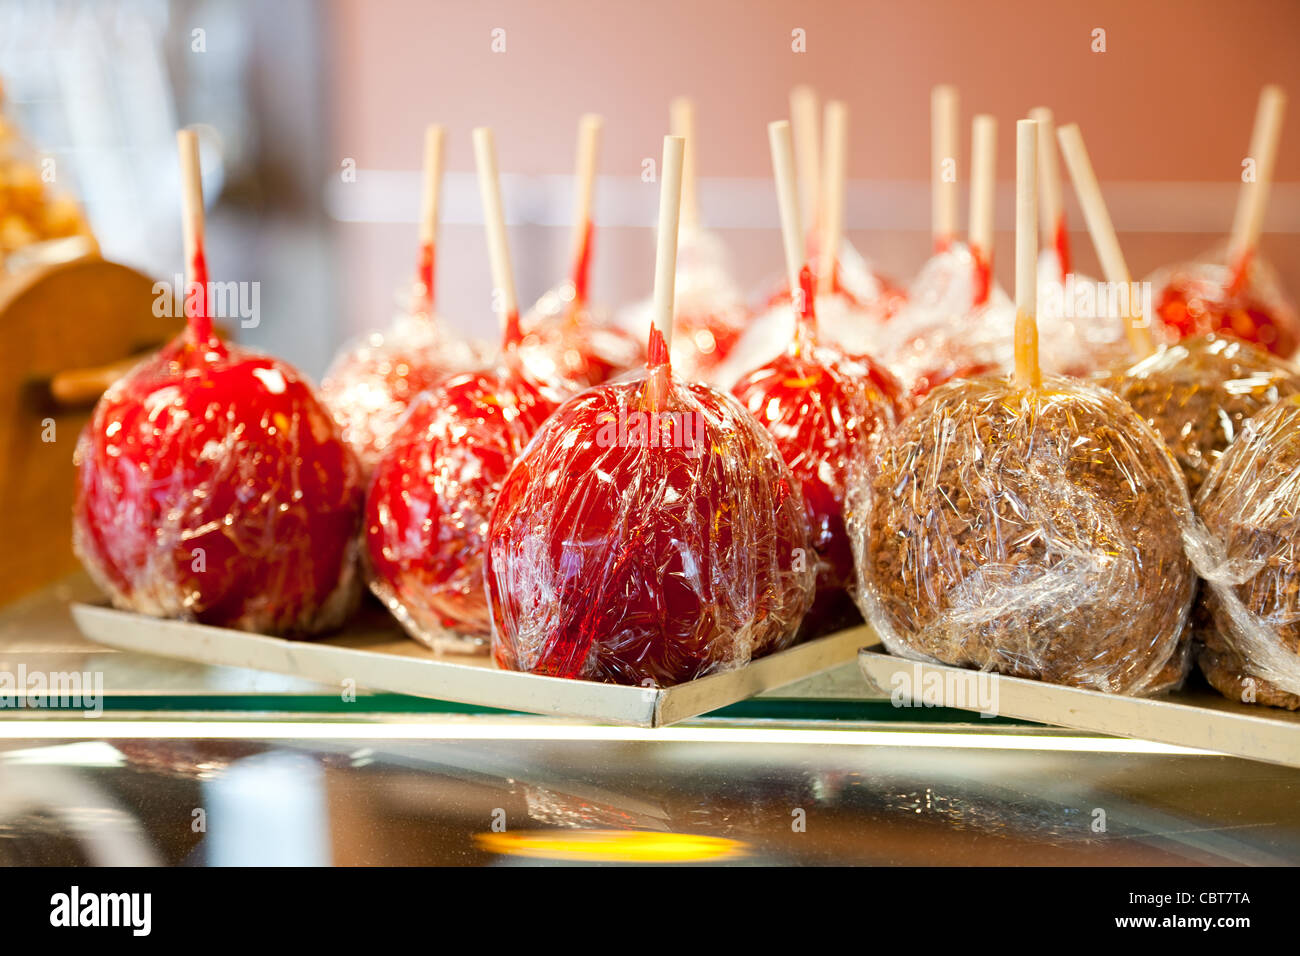 Toffee Apple close up shot Stock Photo